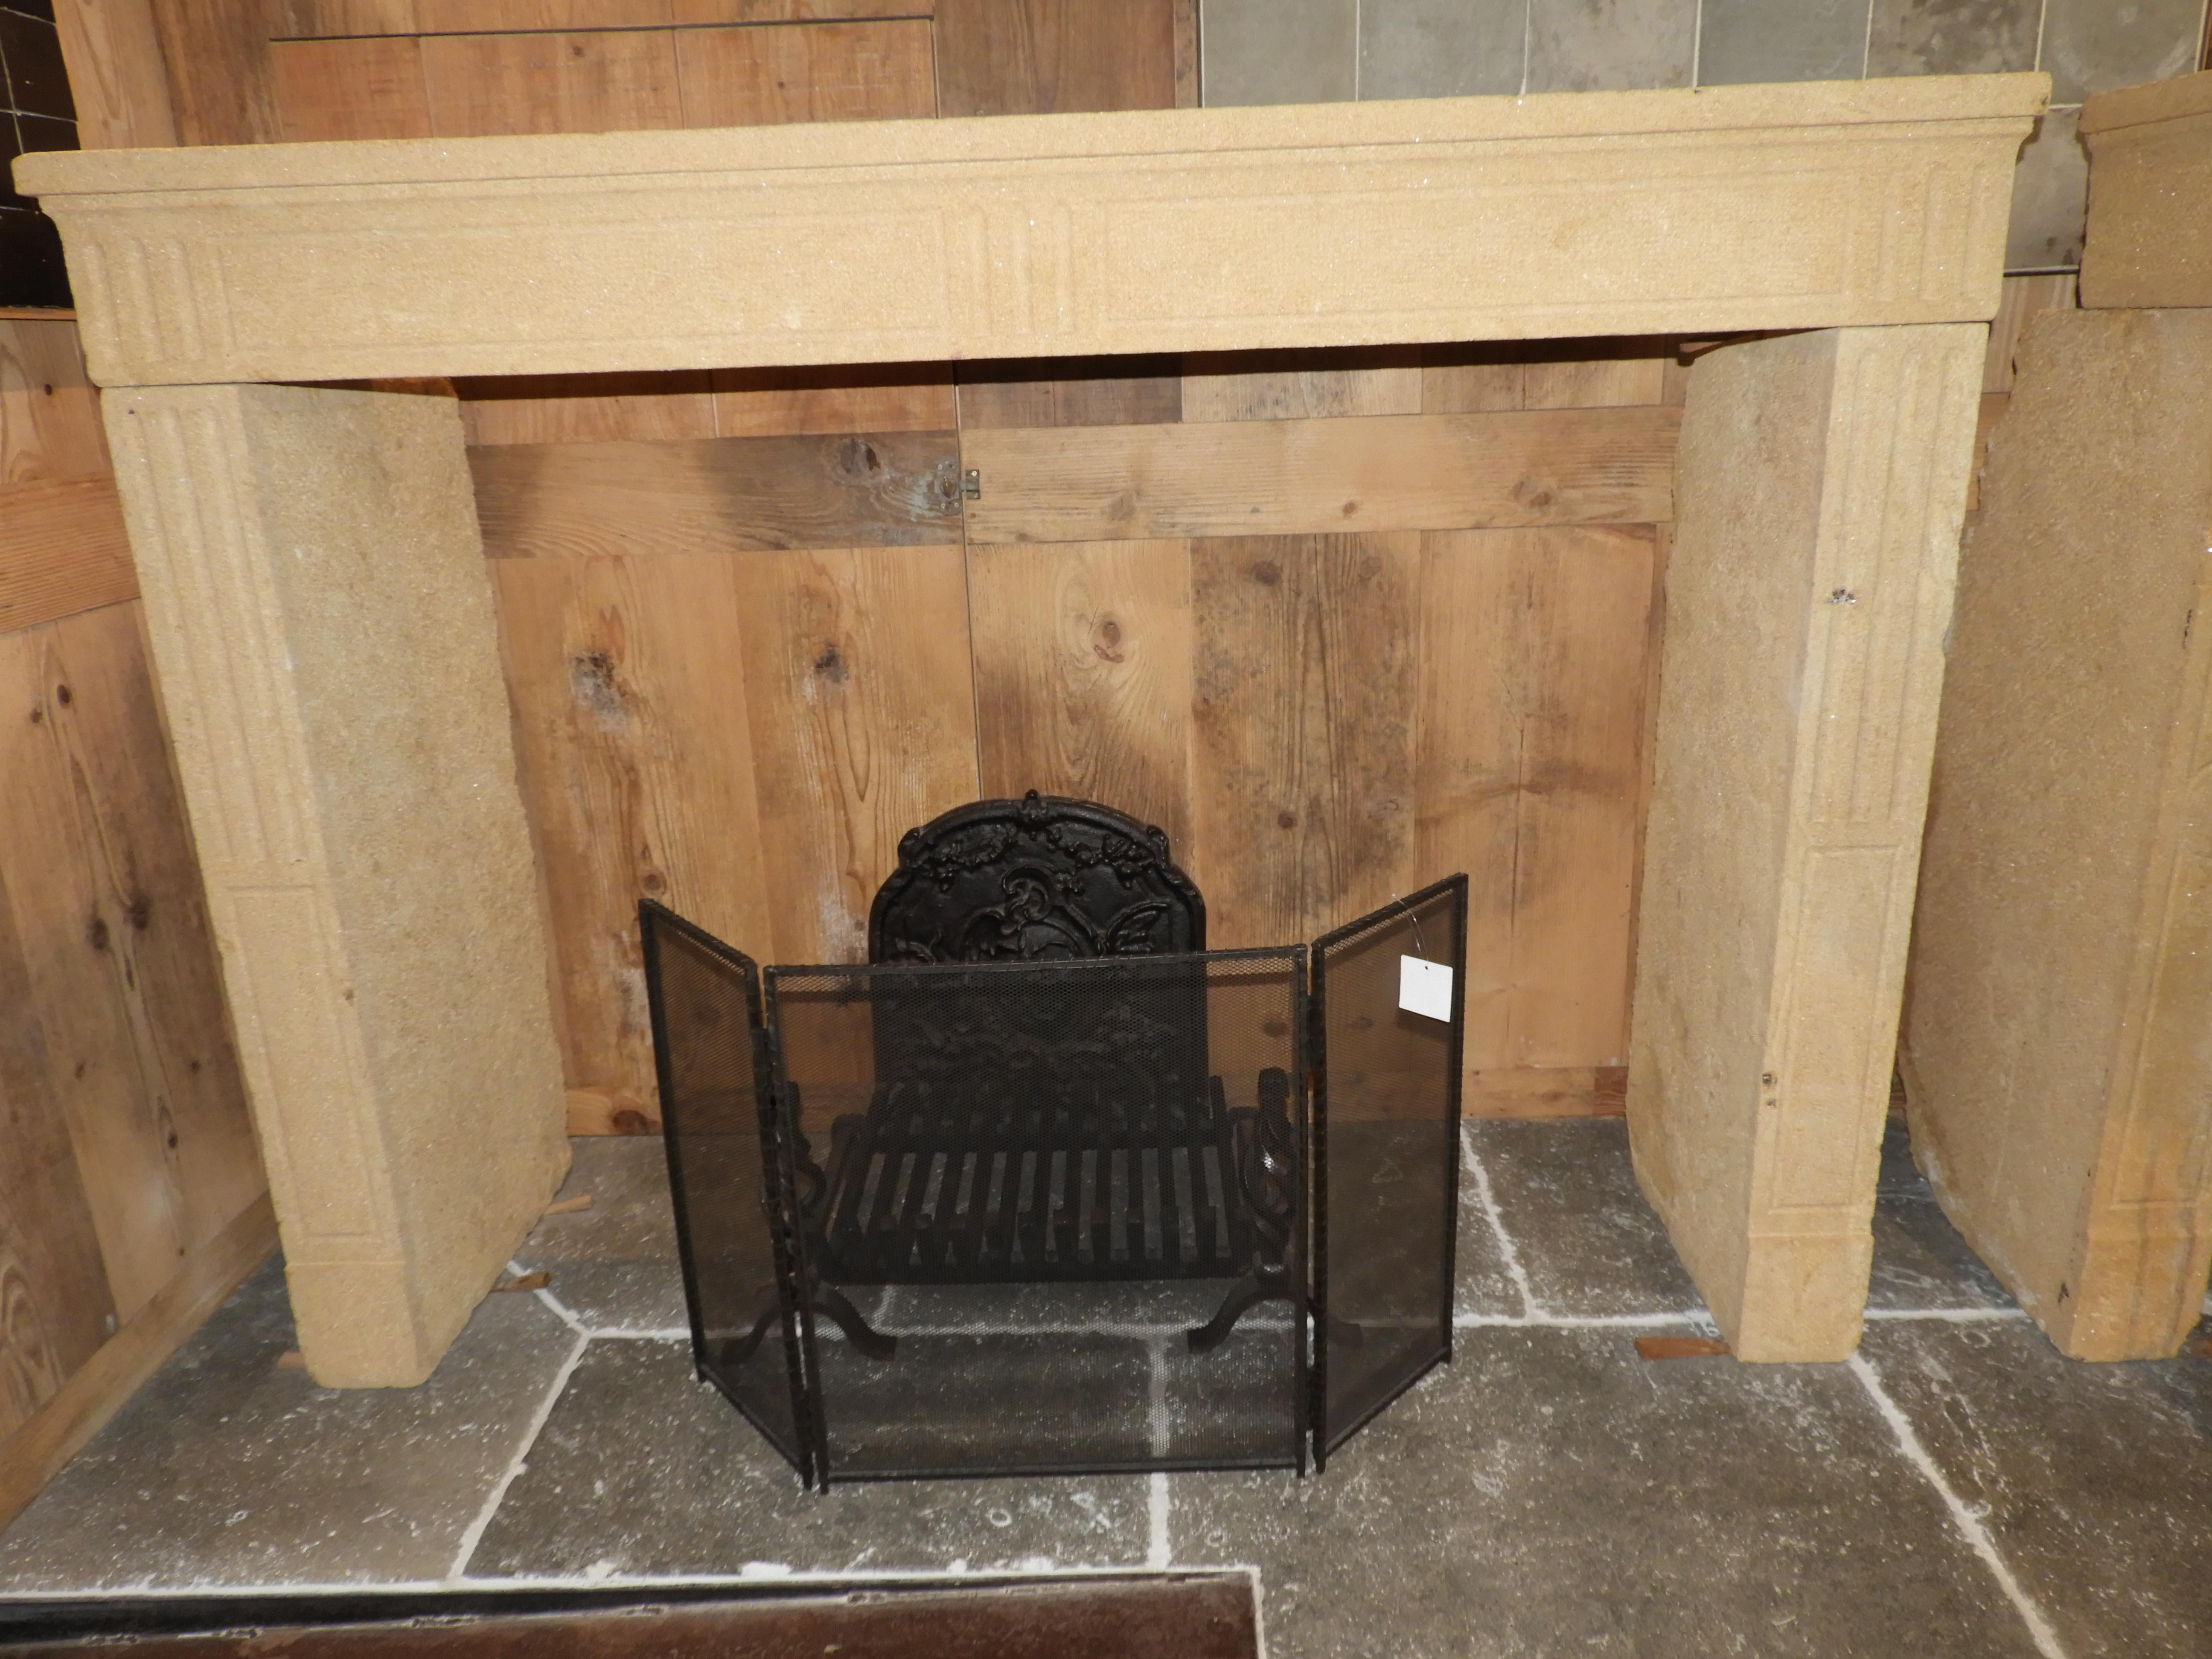 20th century French limestone Louis 16 fireplace.
Measures: Inside 153 cm wide x 113.5 cm high.